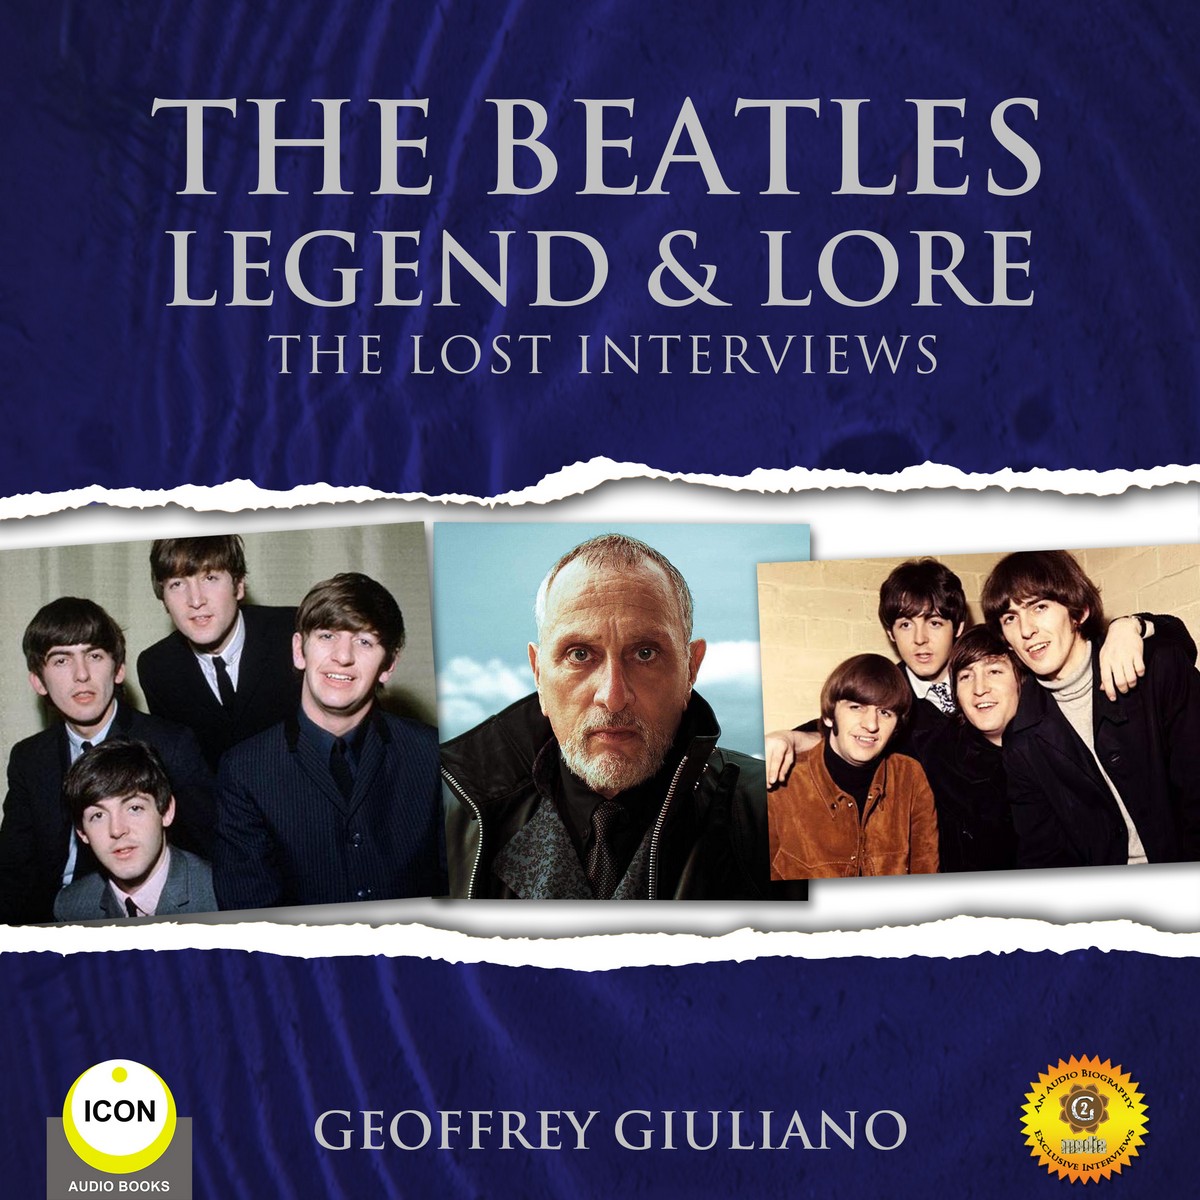 The Beatles Legend & Lore – The Lost Interviews